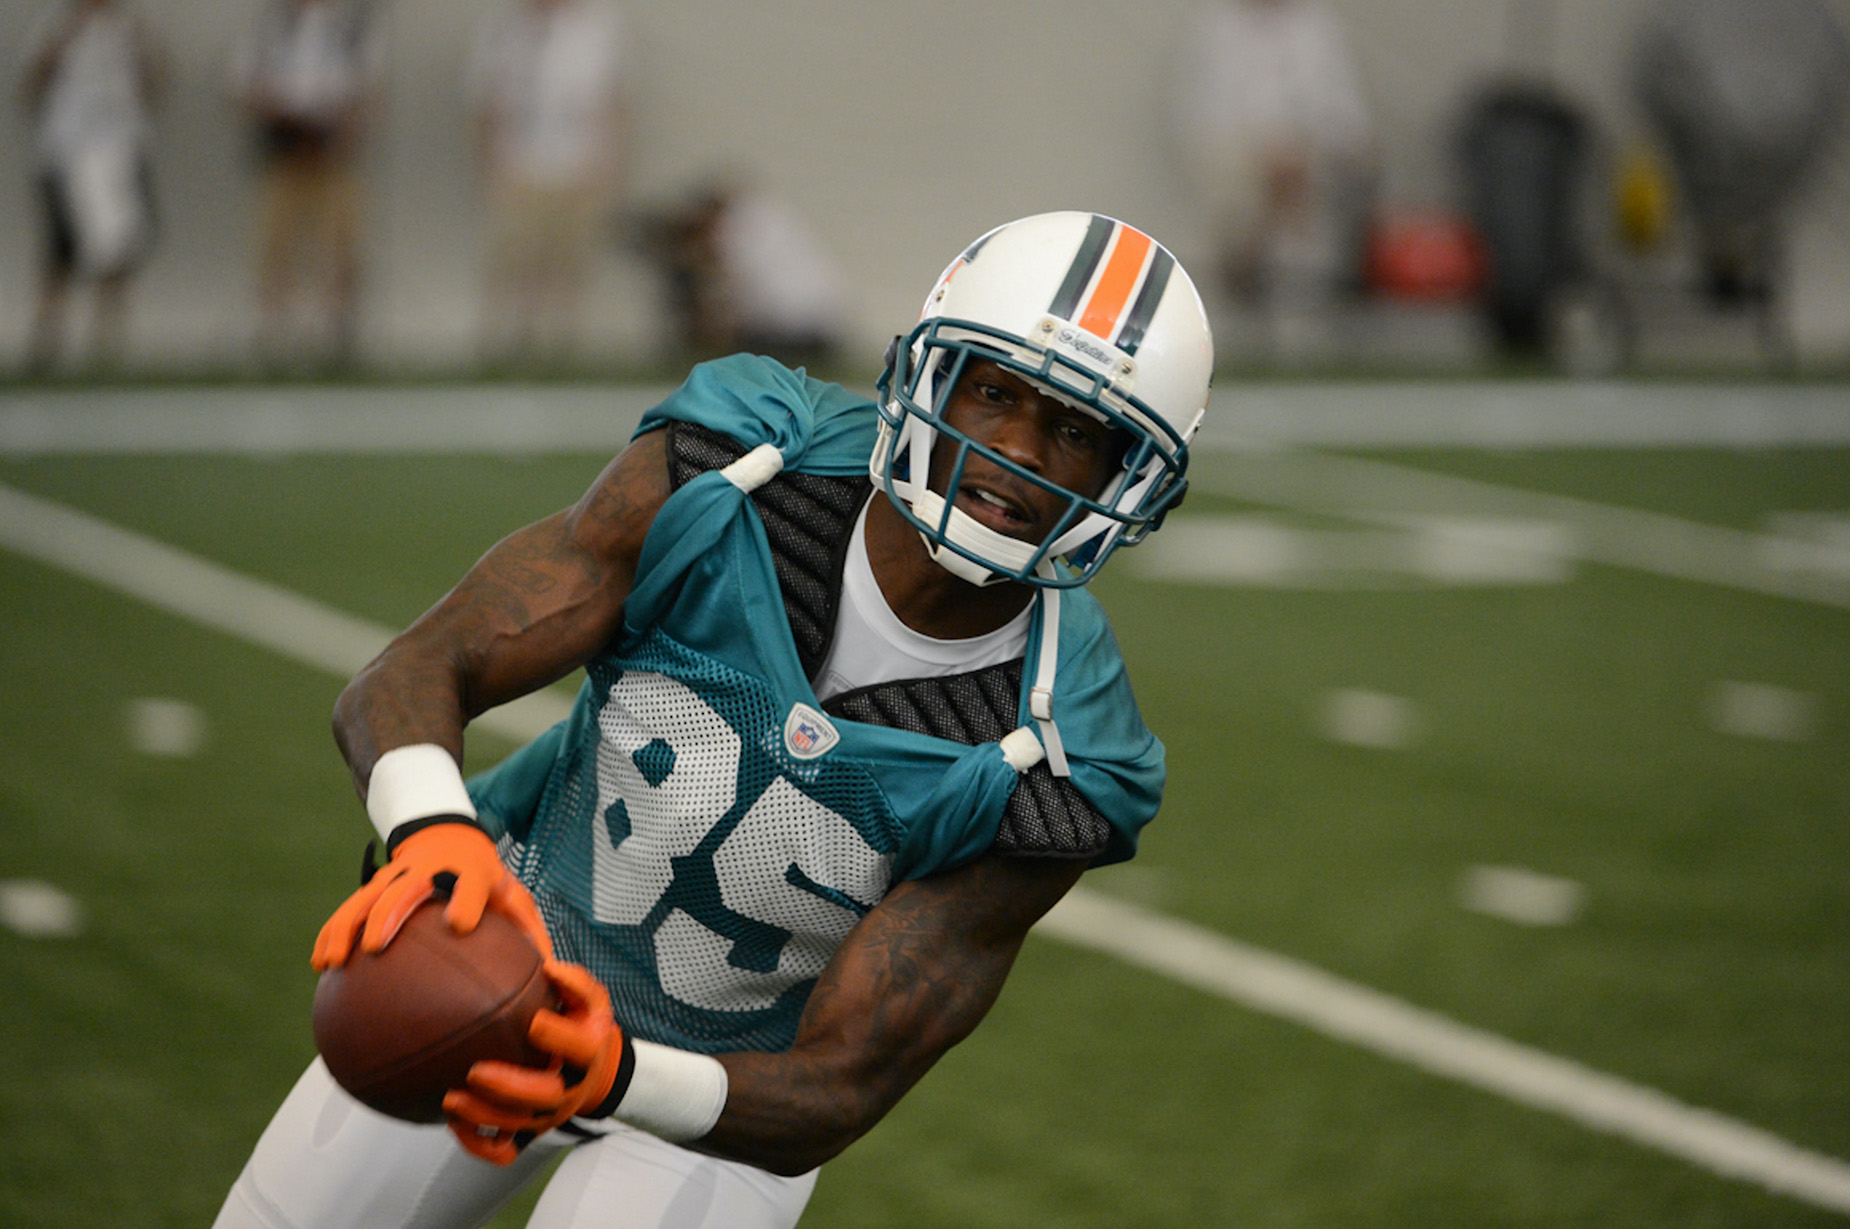 Chad Johnson briefly suited up for the Miami Dolphins and will be boxing in their home stadium.